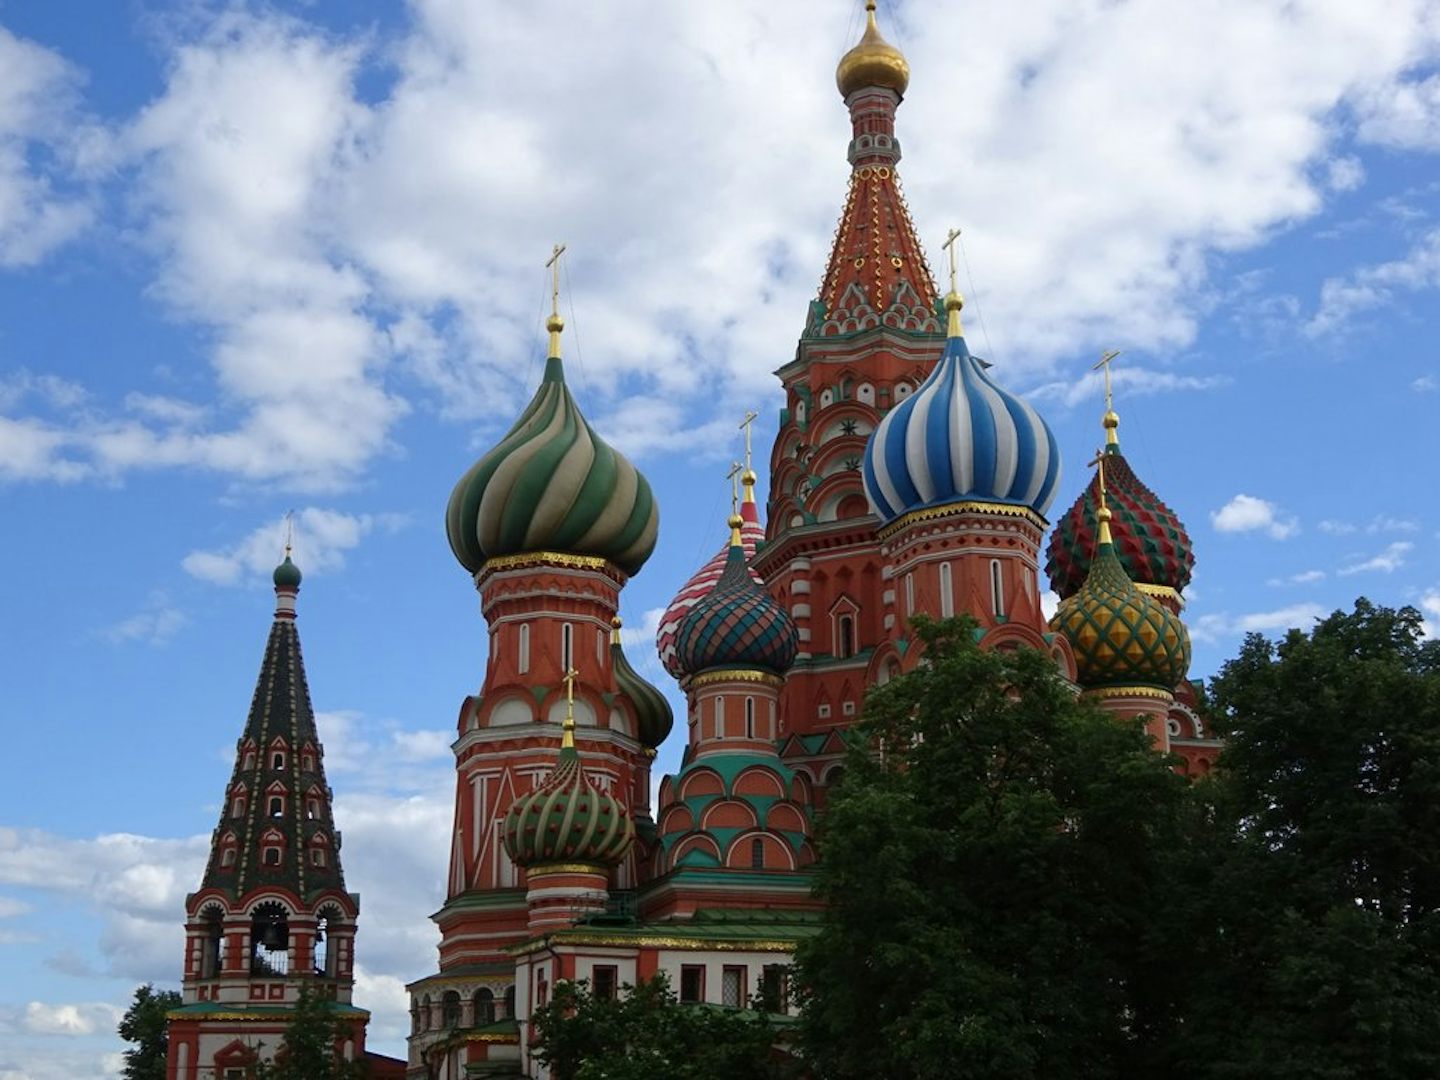 St Basil's Cathedral on Red Square